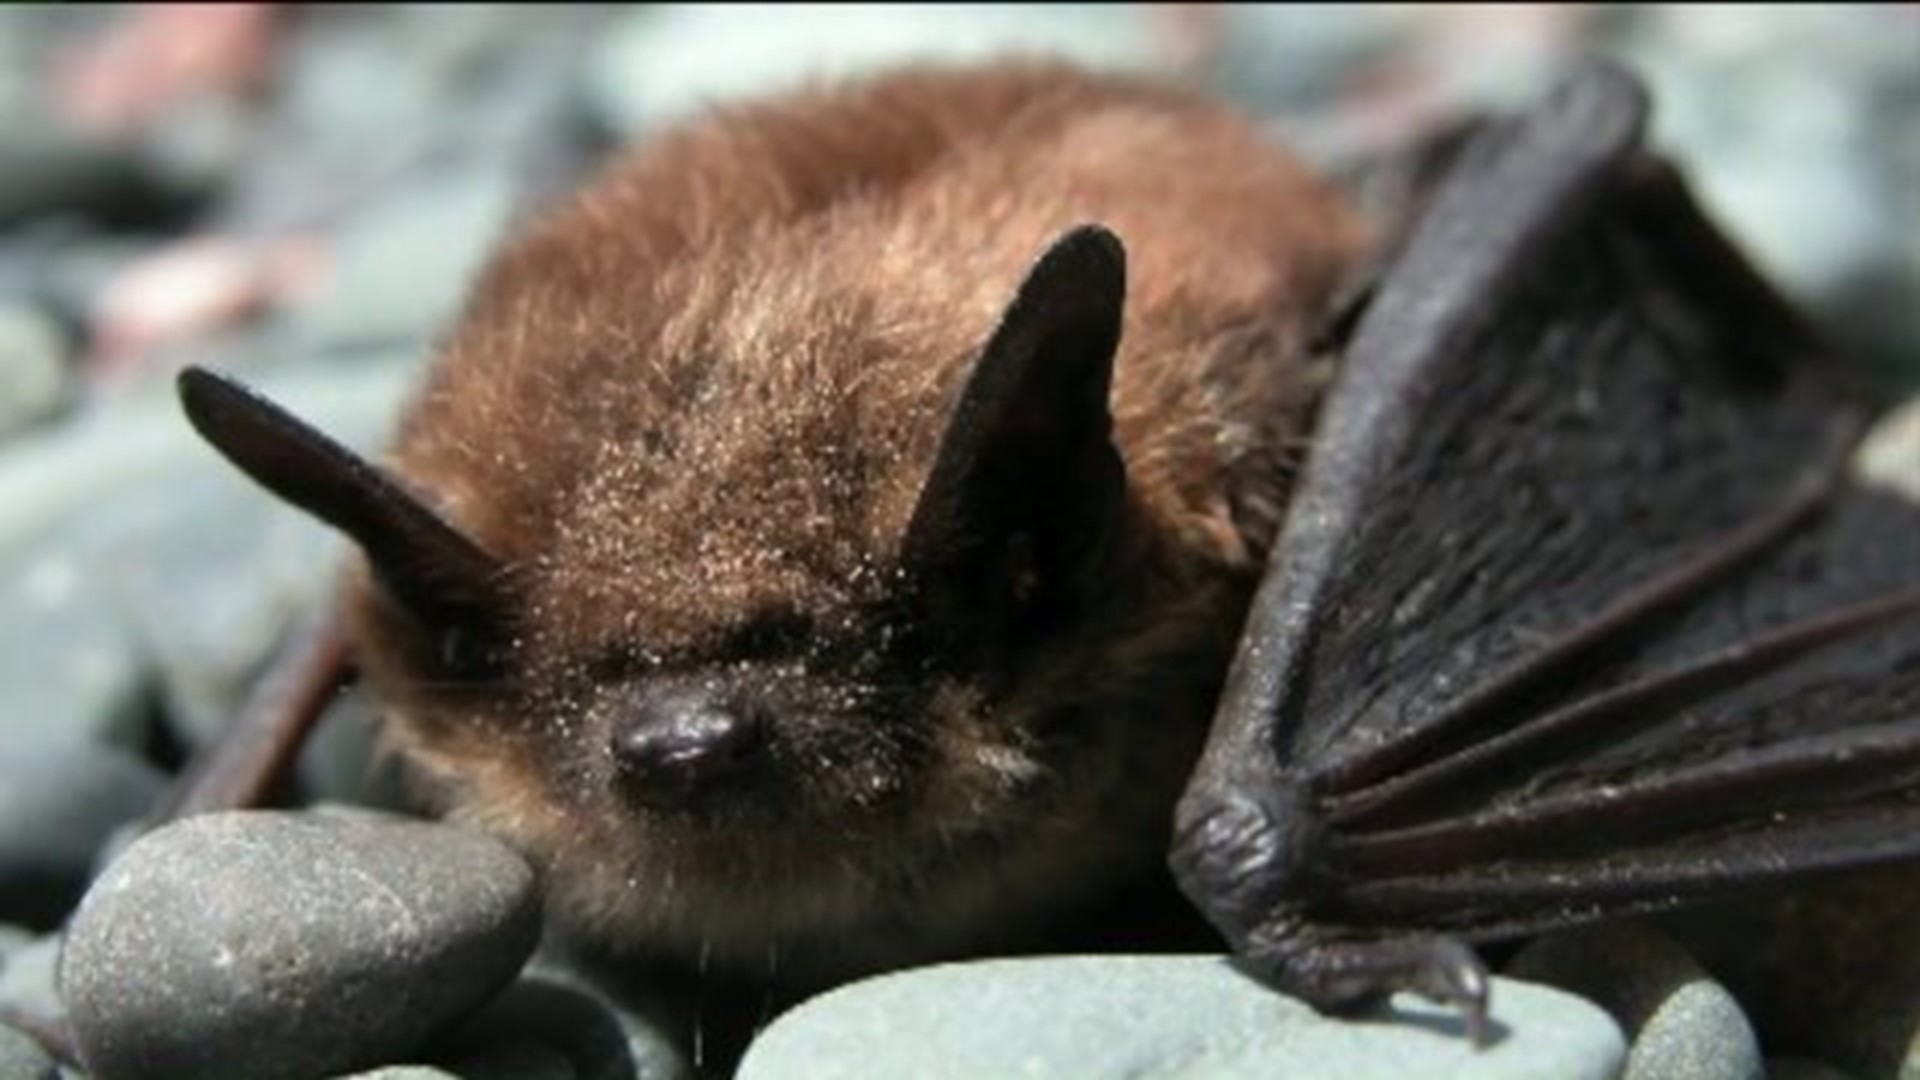 On Friday the 13th, A Bat Falls To Bench In Luzerne County Courtroom